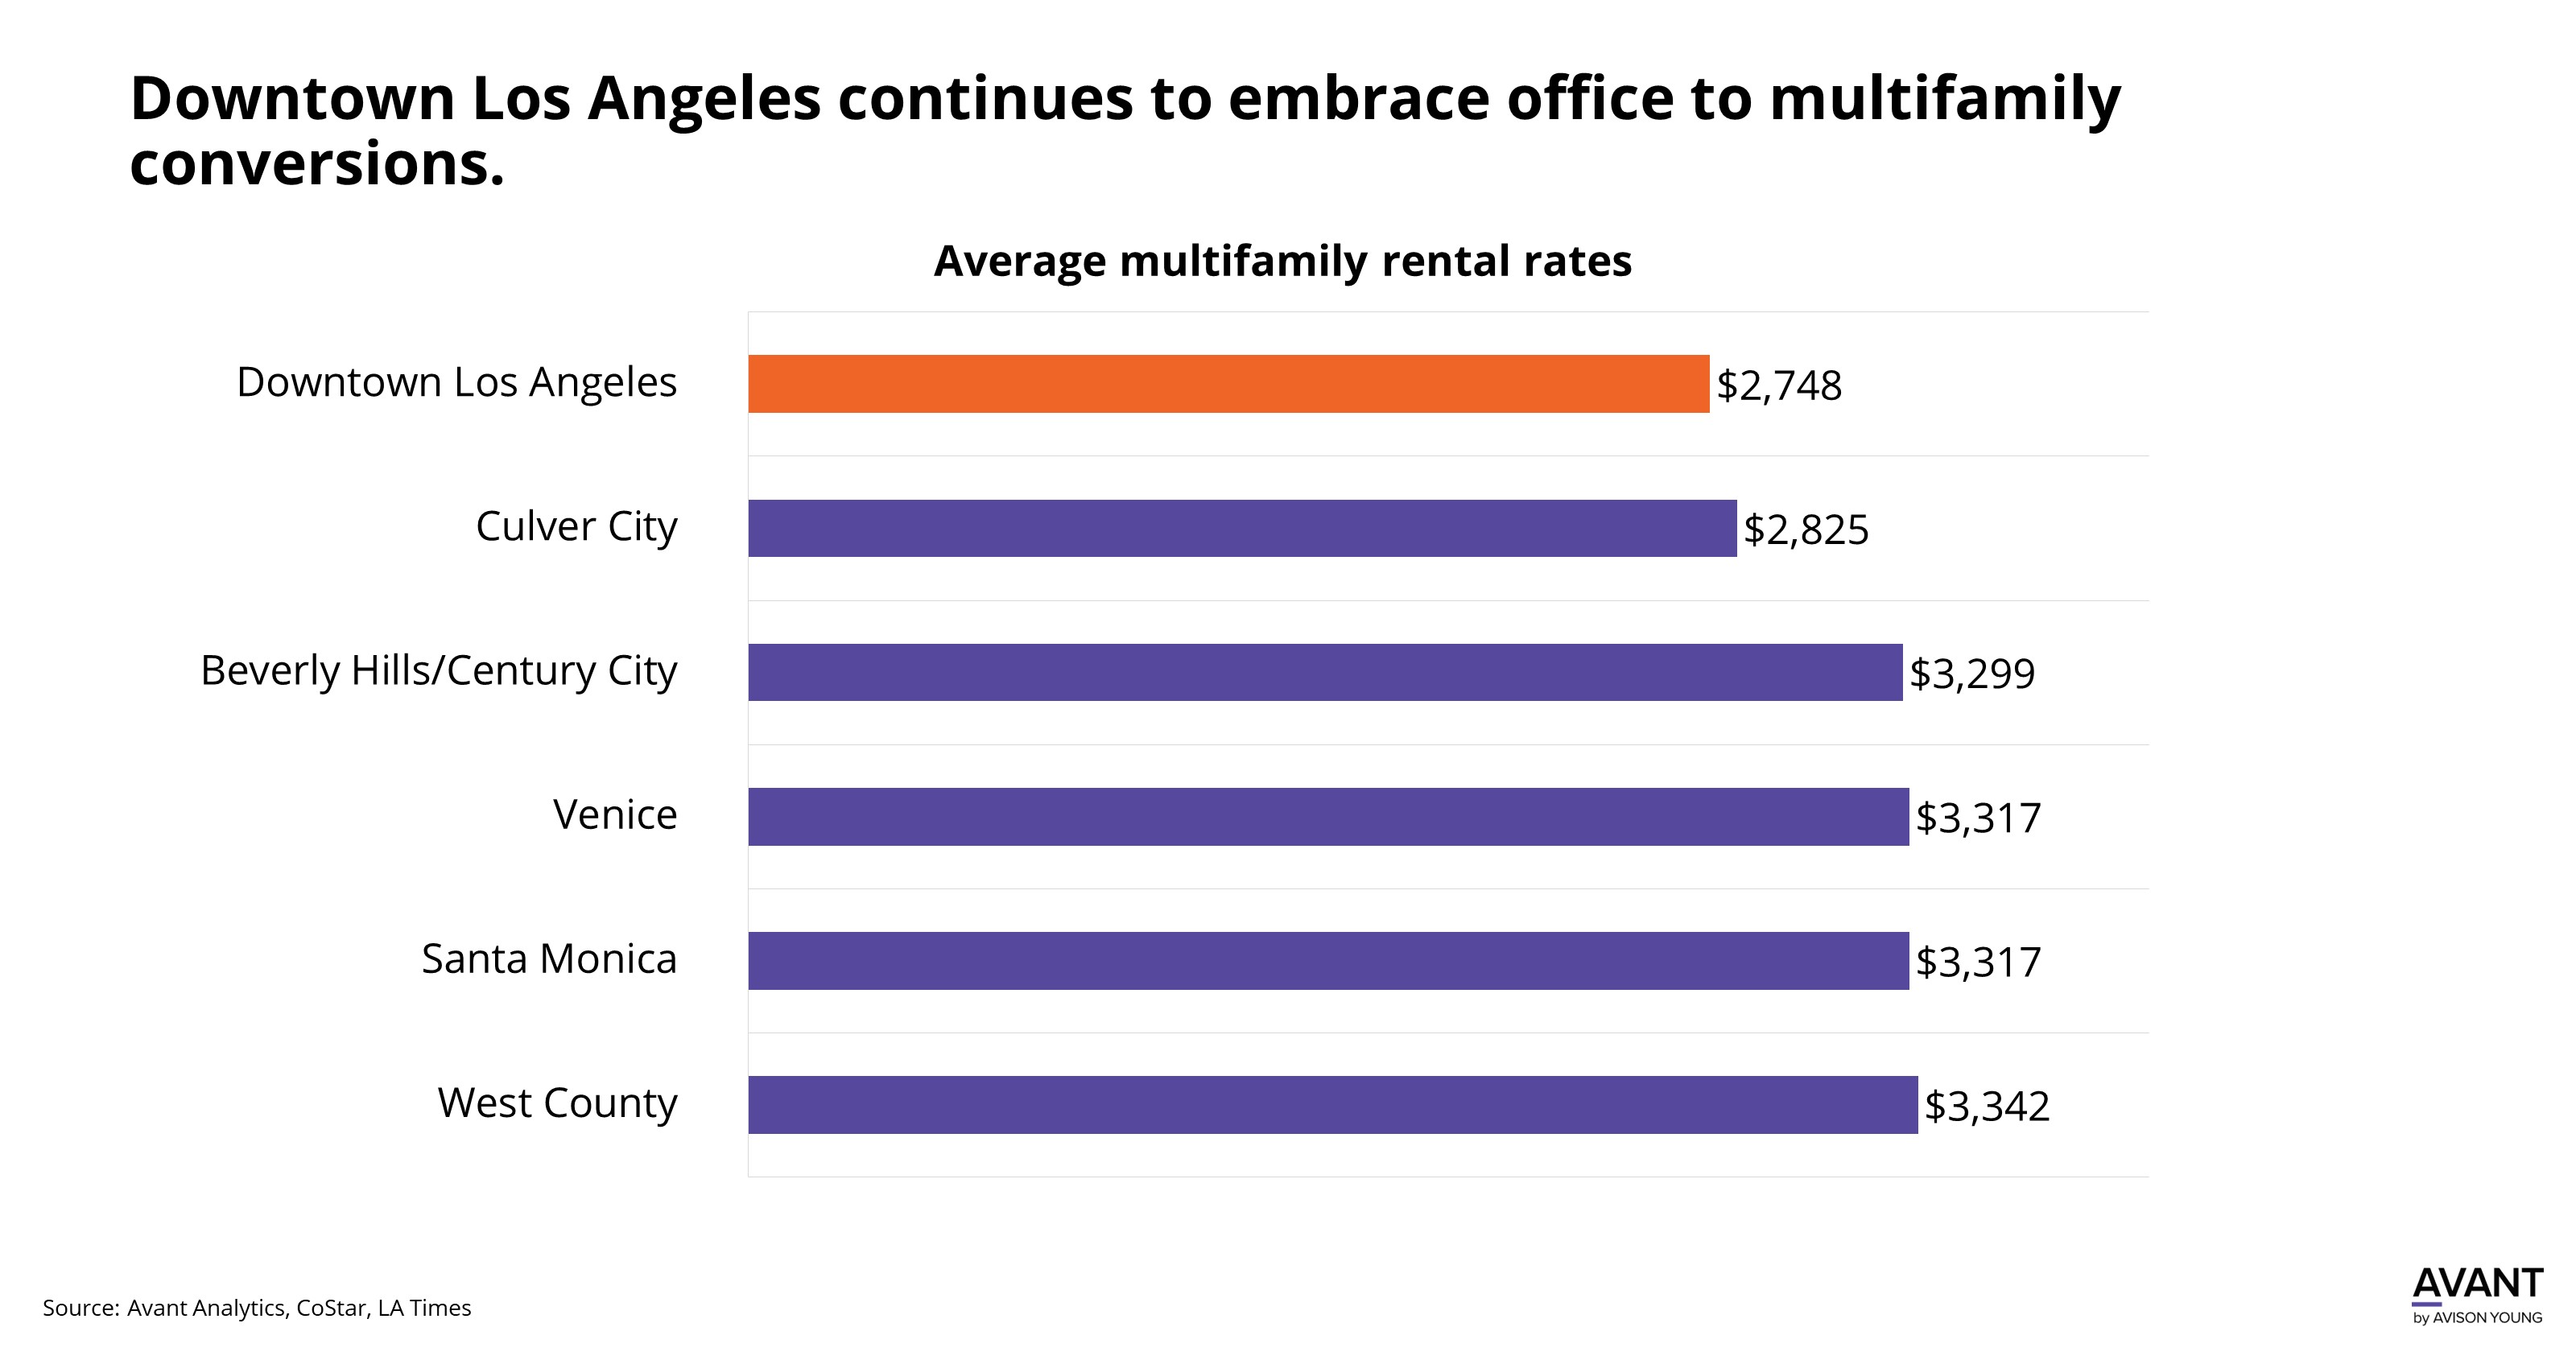 Downtown Los Angeles continues to embrace office to multifamily conversions